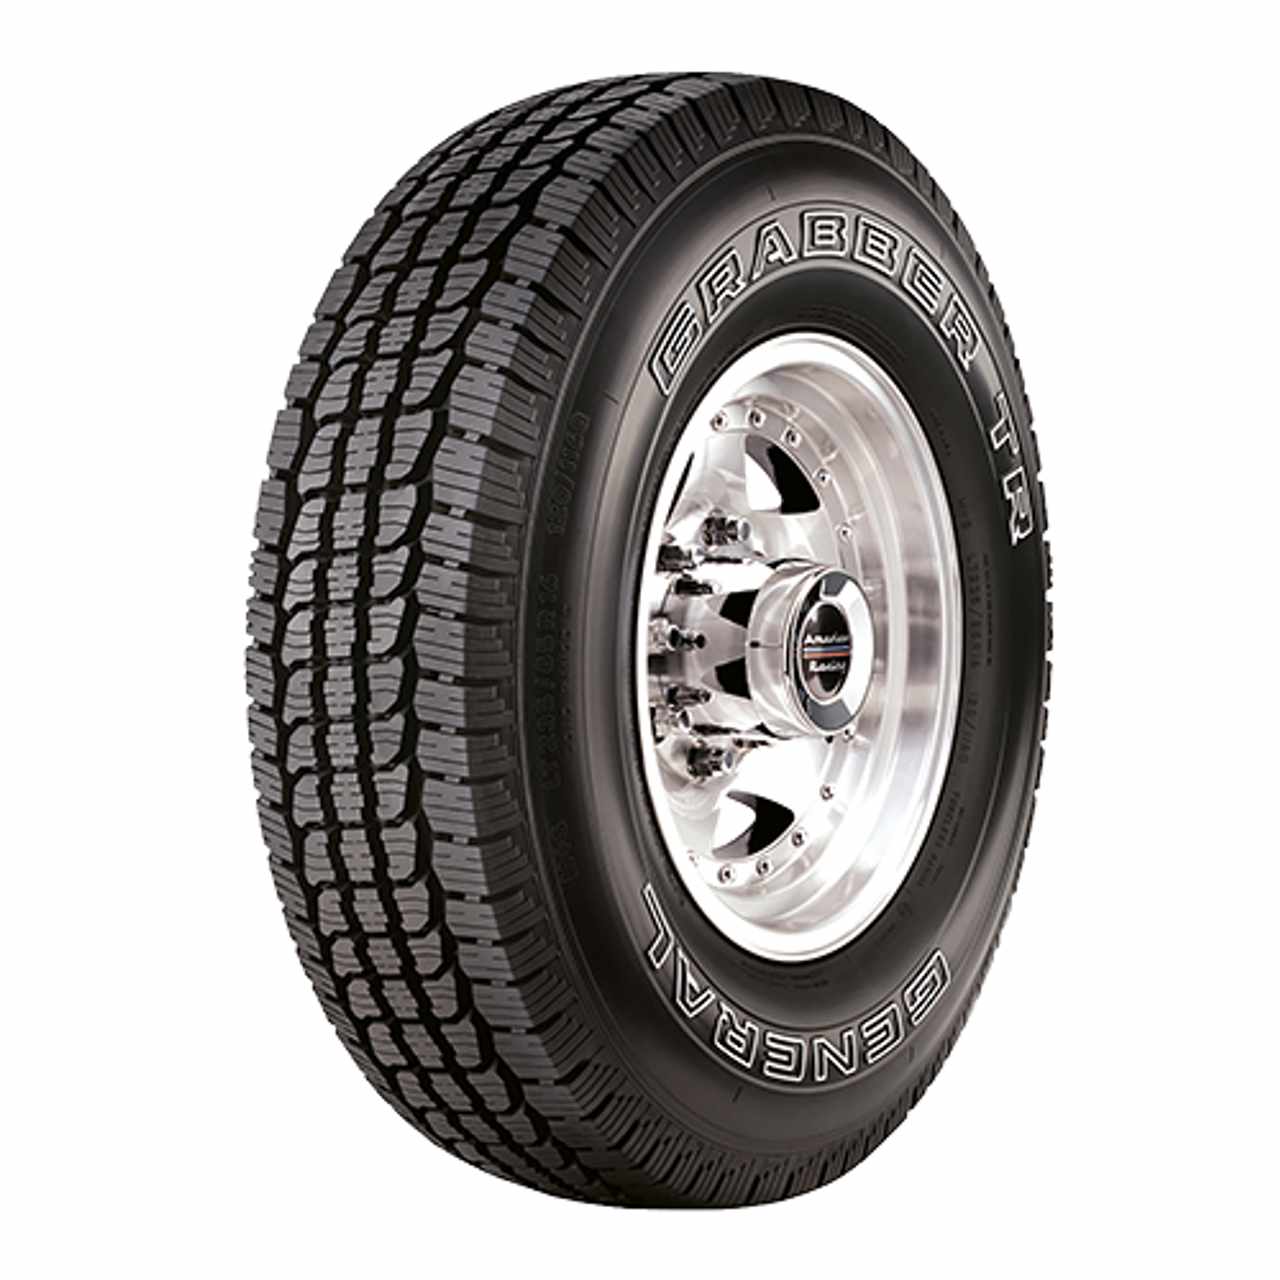 GENERAL TIRE GRABBER TR 205/80R16 104T BSW XL